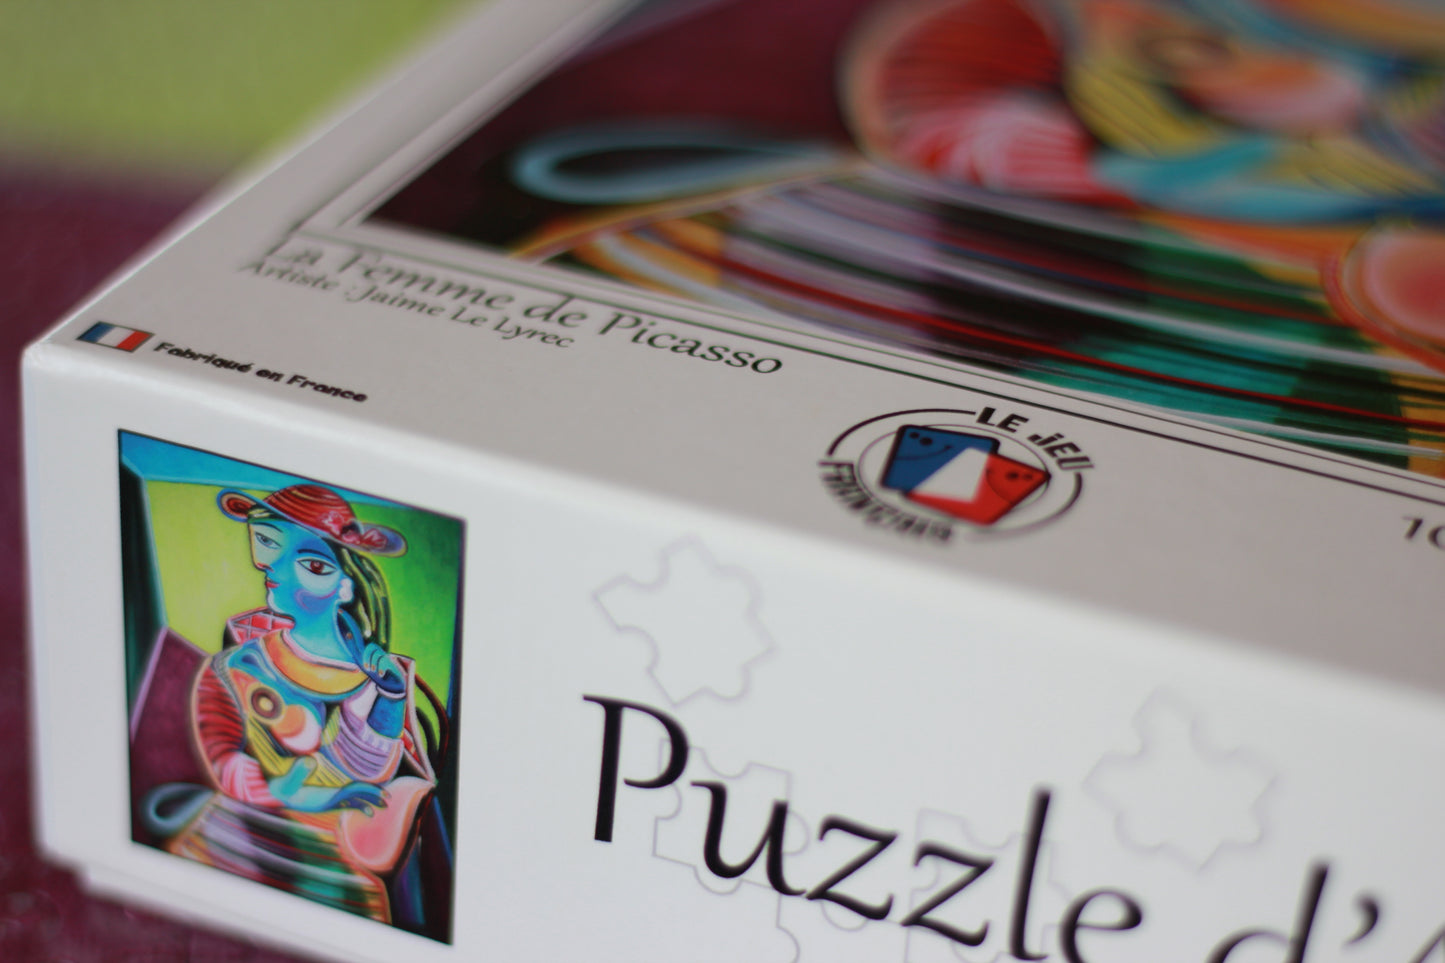 Puzzle d'Art Collector - 1000 pièces - Tribute to Picasso